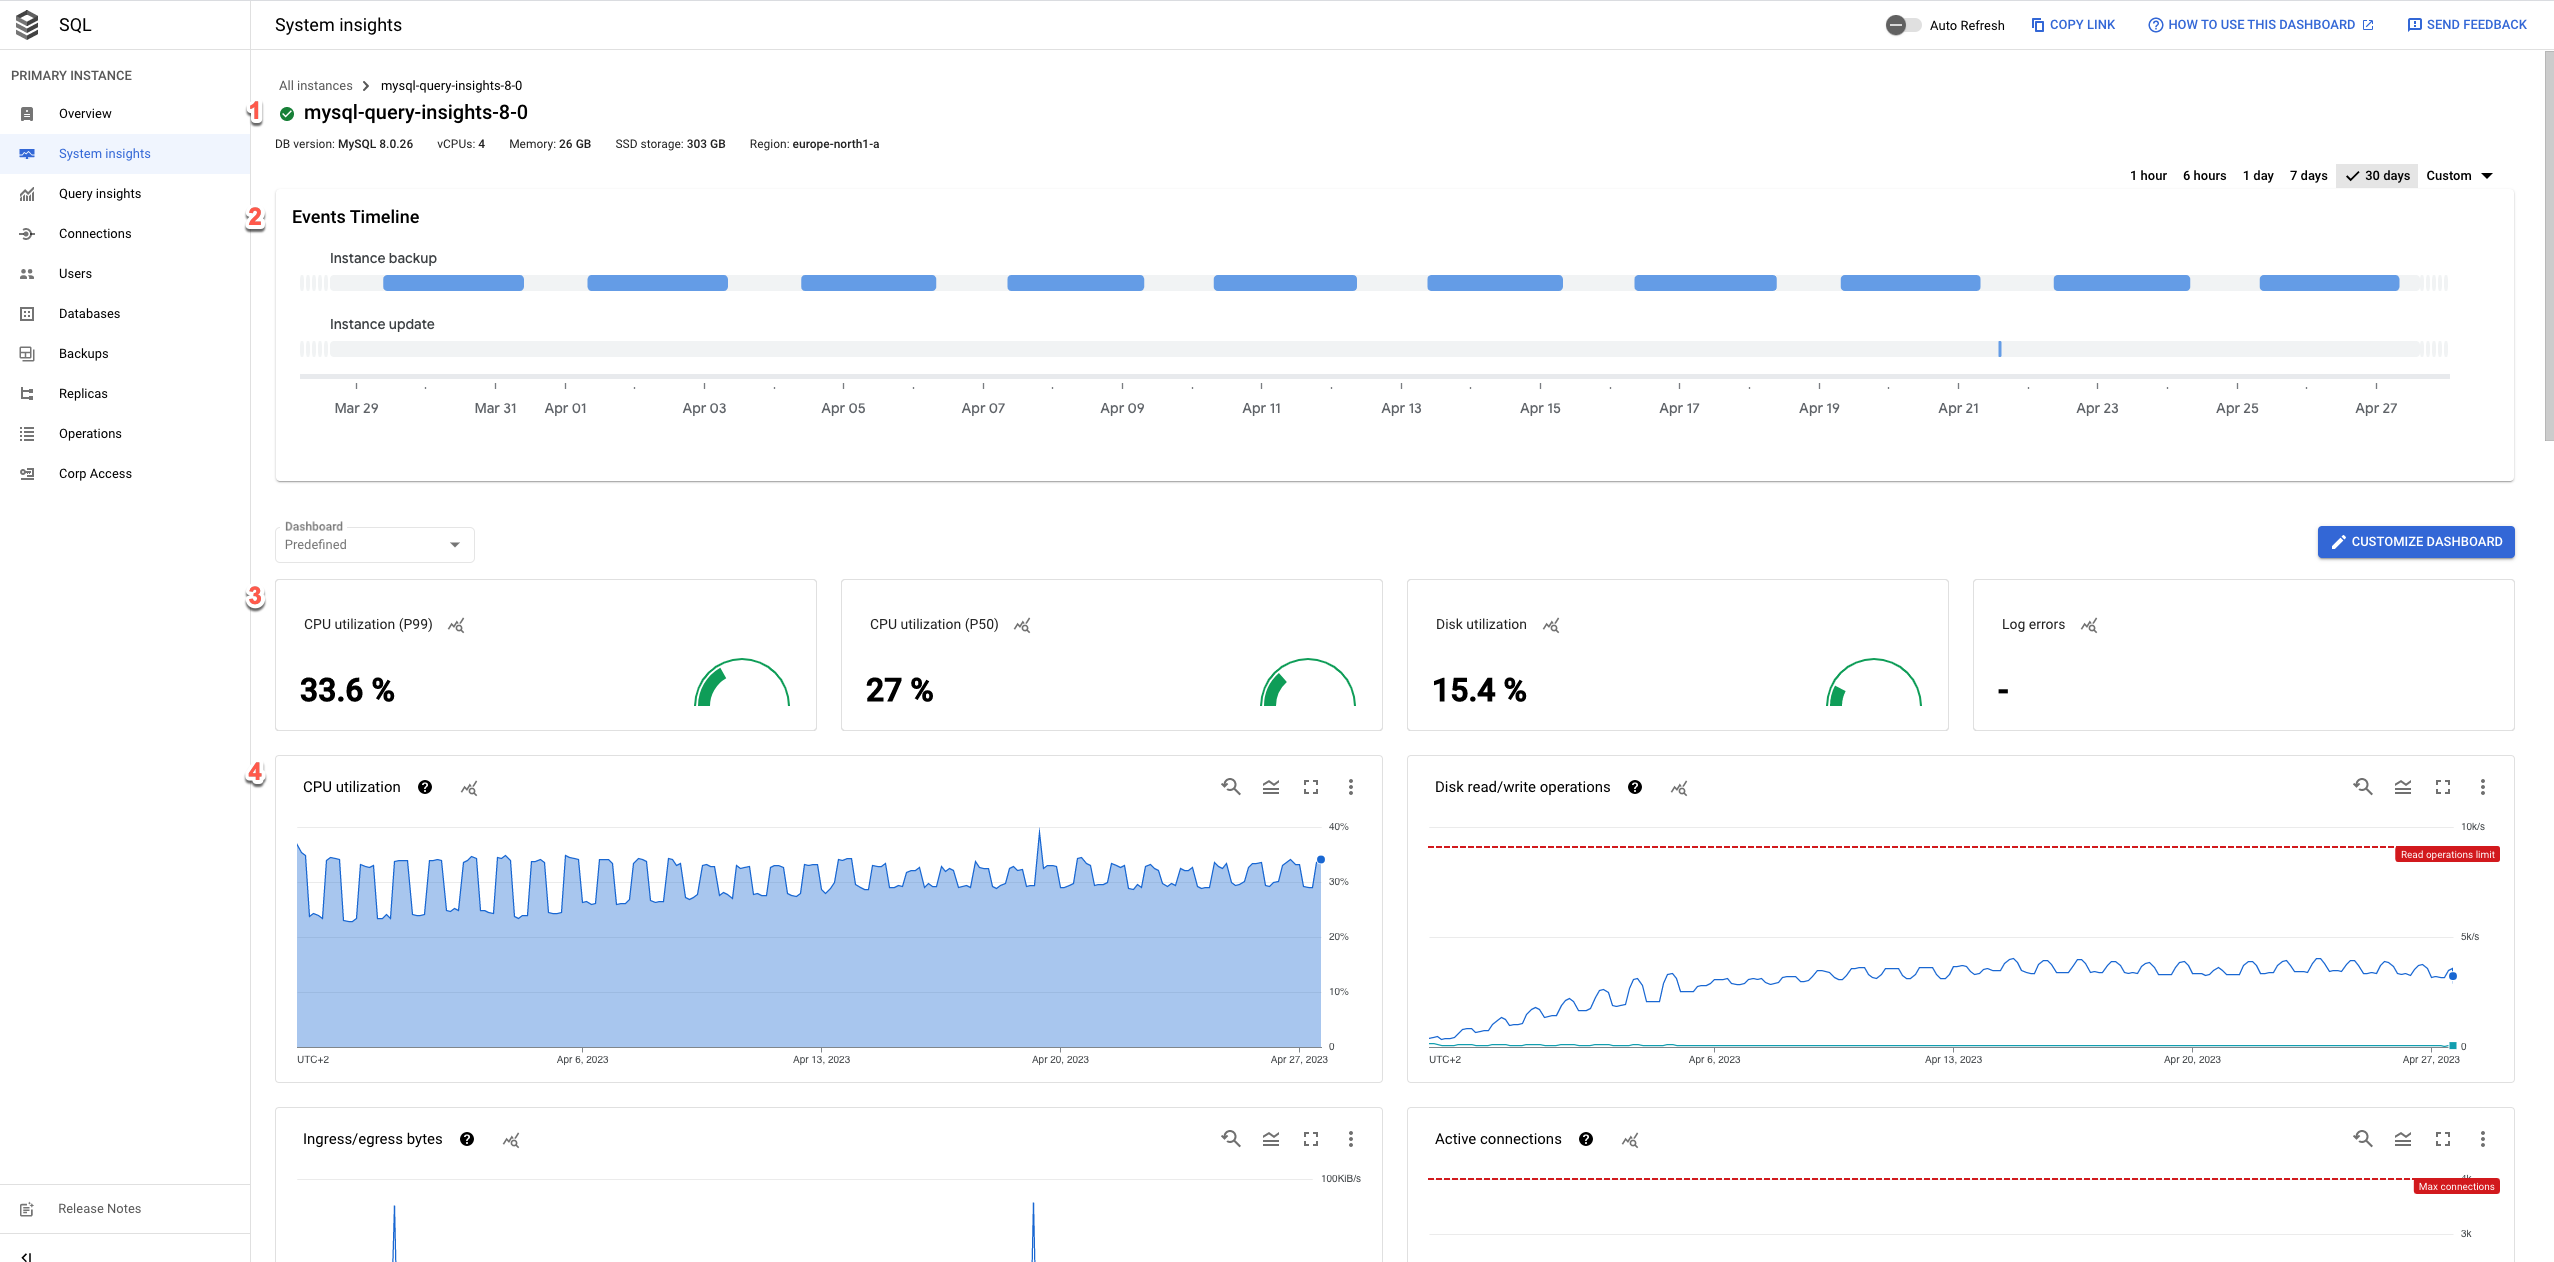 Dashboard image showing metrics and events timeline.